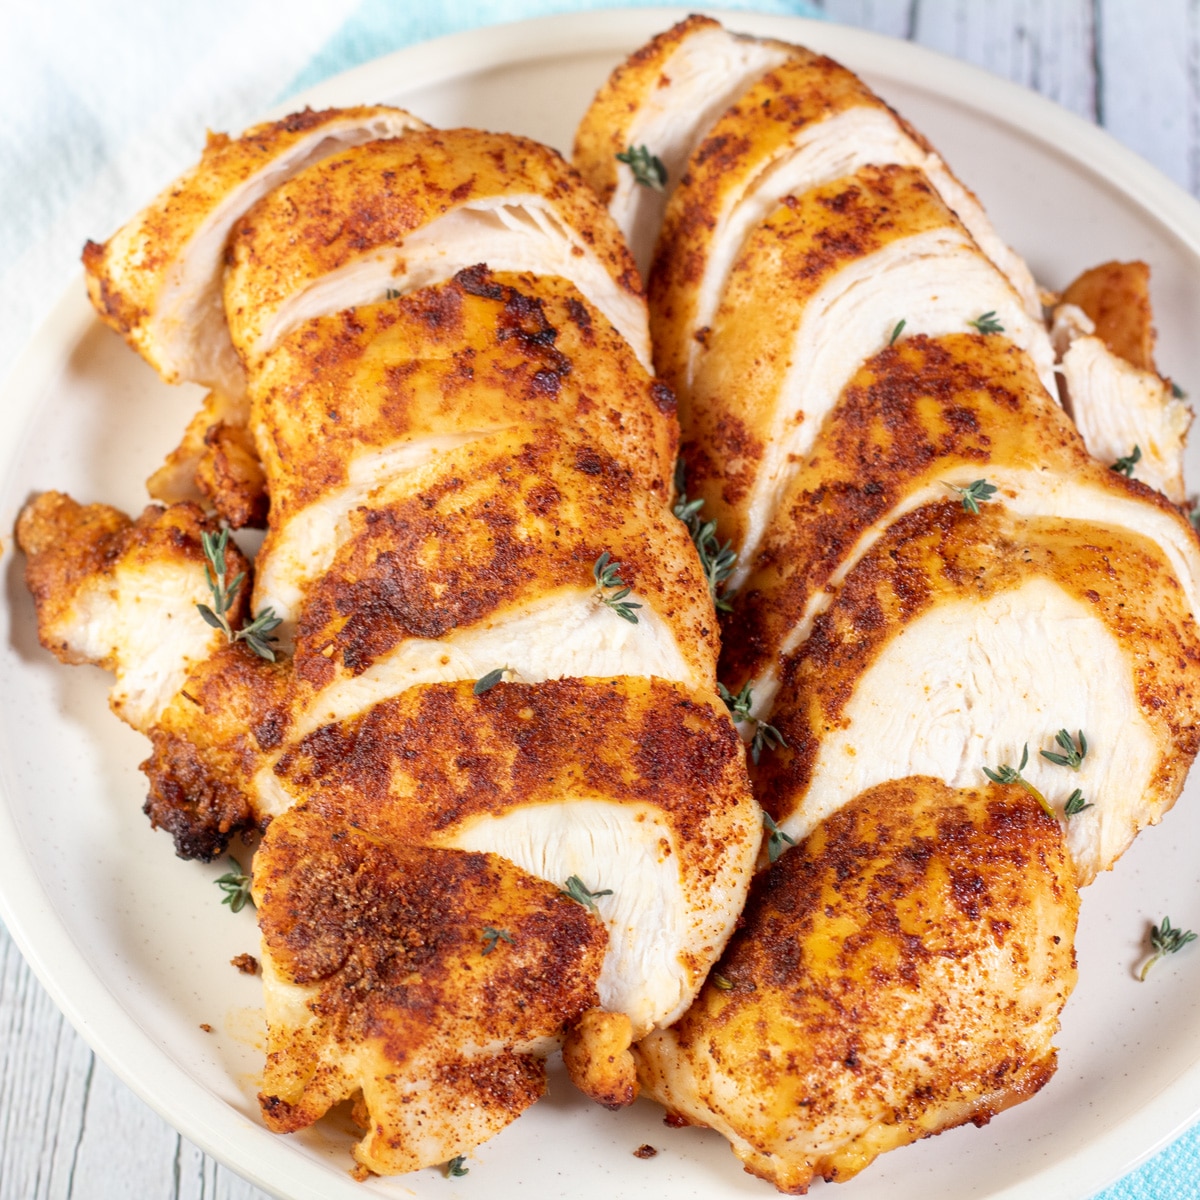 Square image showing sliced boneless skinless air fryer chicken breasts.